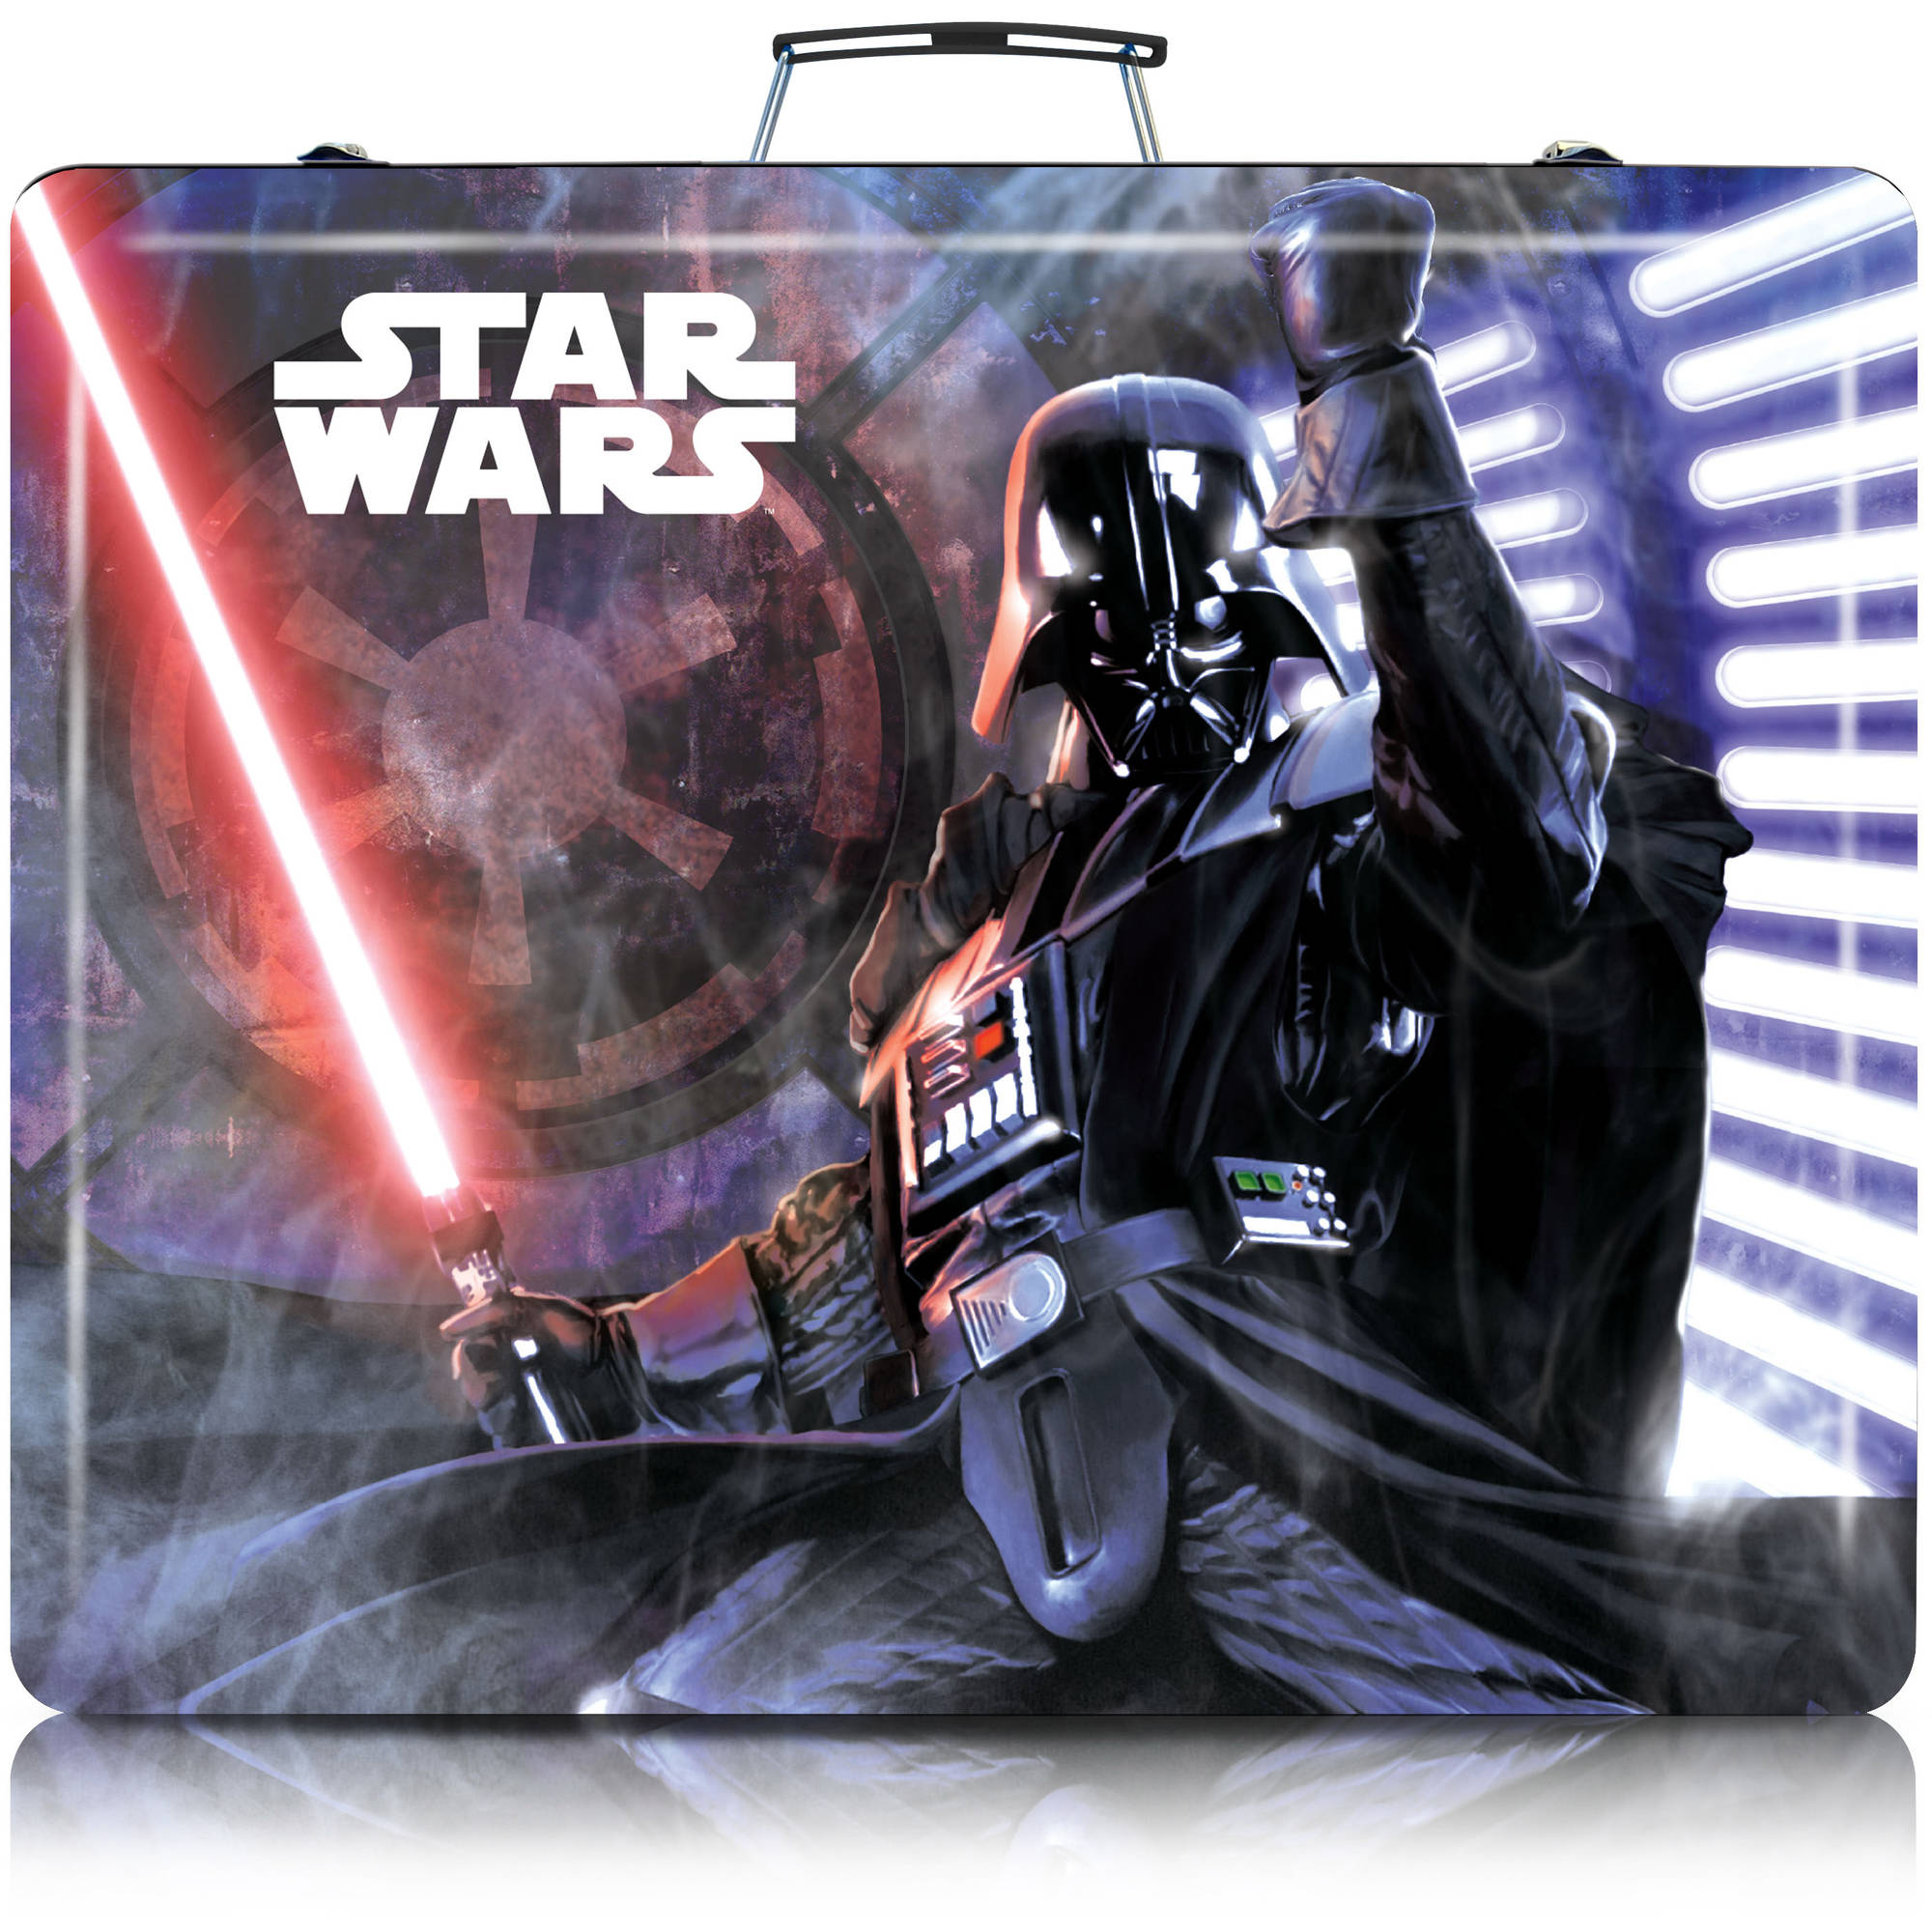 Star Wars Large Art and Stationary Activity Set - image 1 of 2